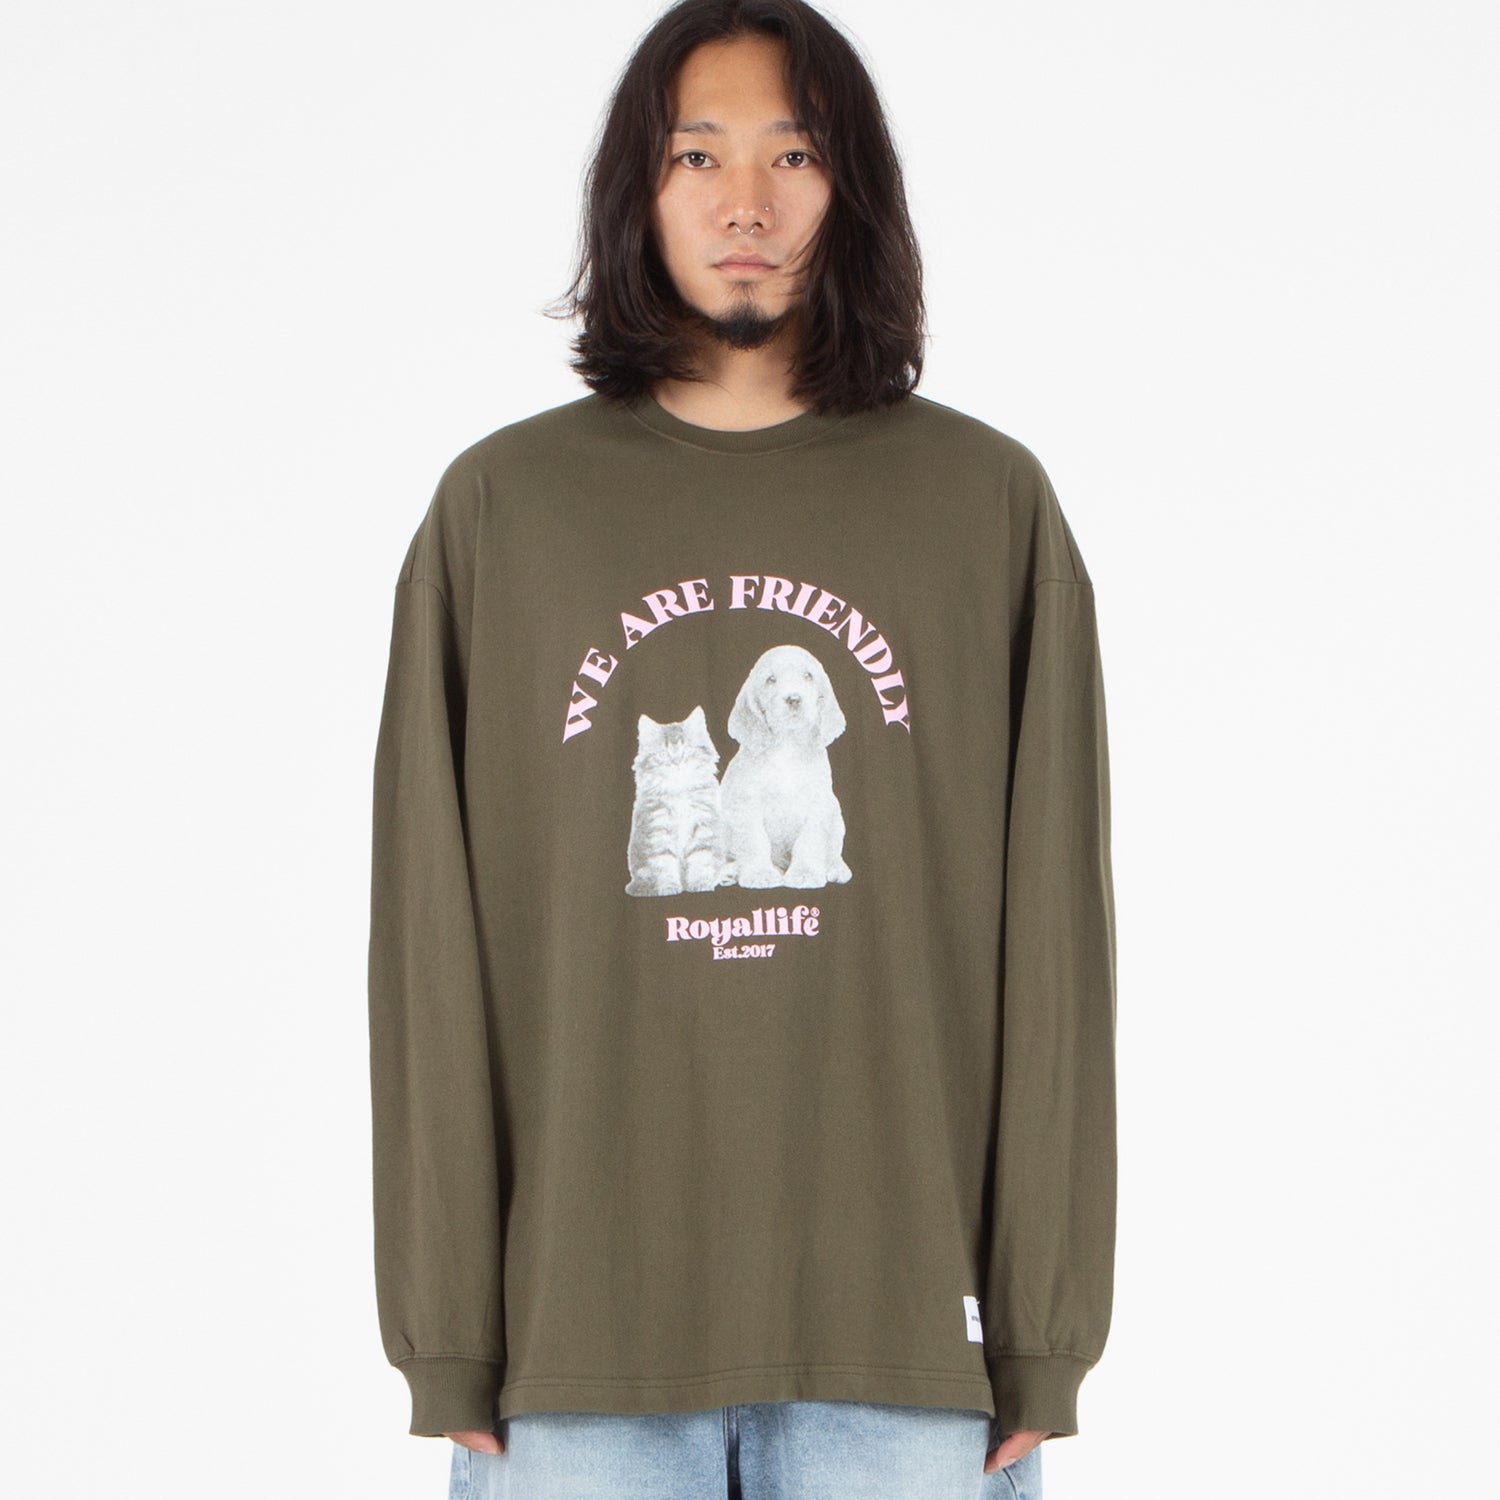 RLLR1101 Cat and Dog Long Sleeve - Olive Green